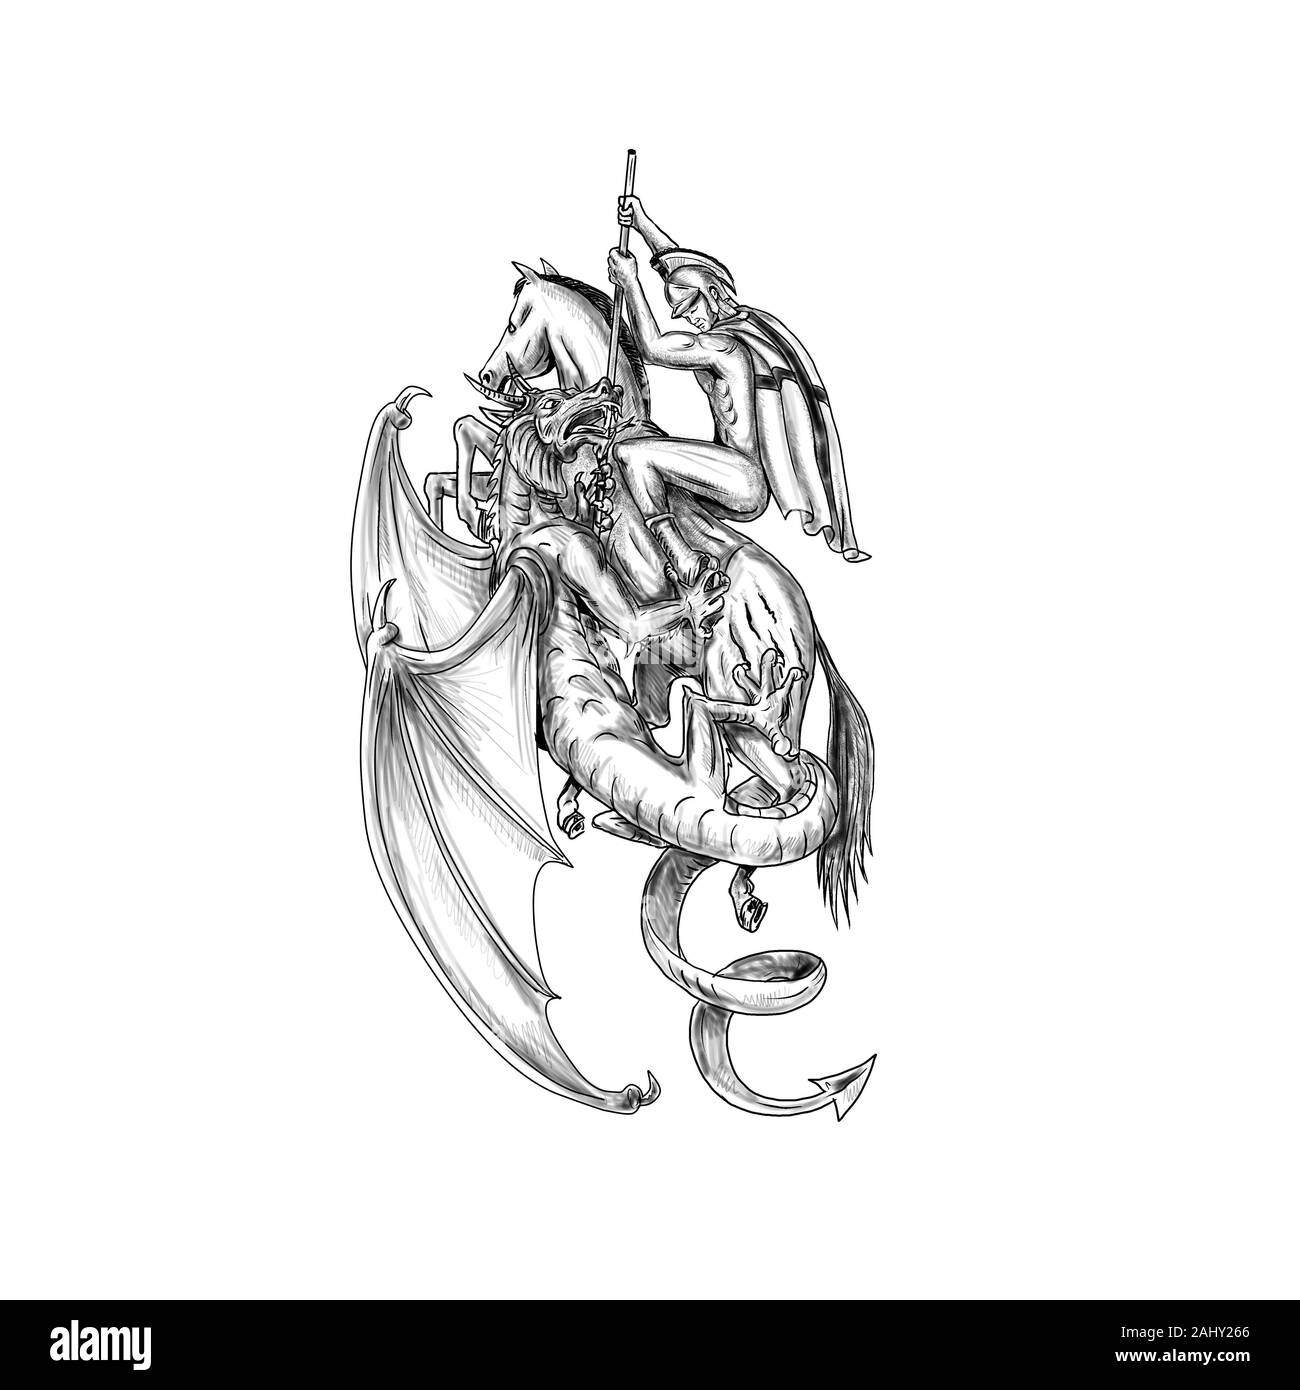 Tattoo style illustration of St. George riding horse fighting slaying mythical dragon with spear on isolated background. Stock Photo